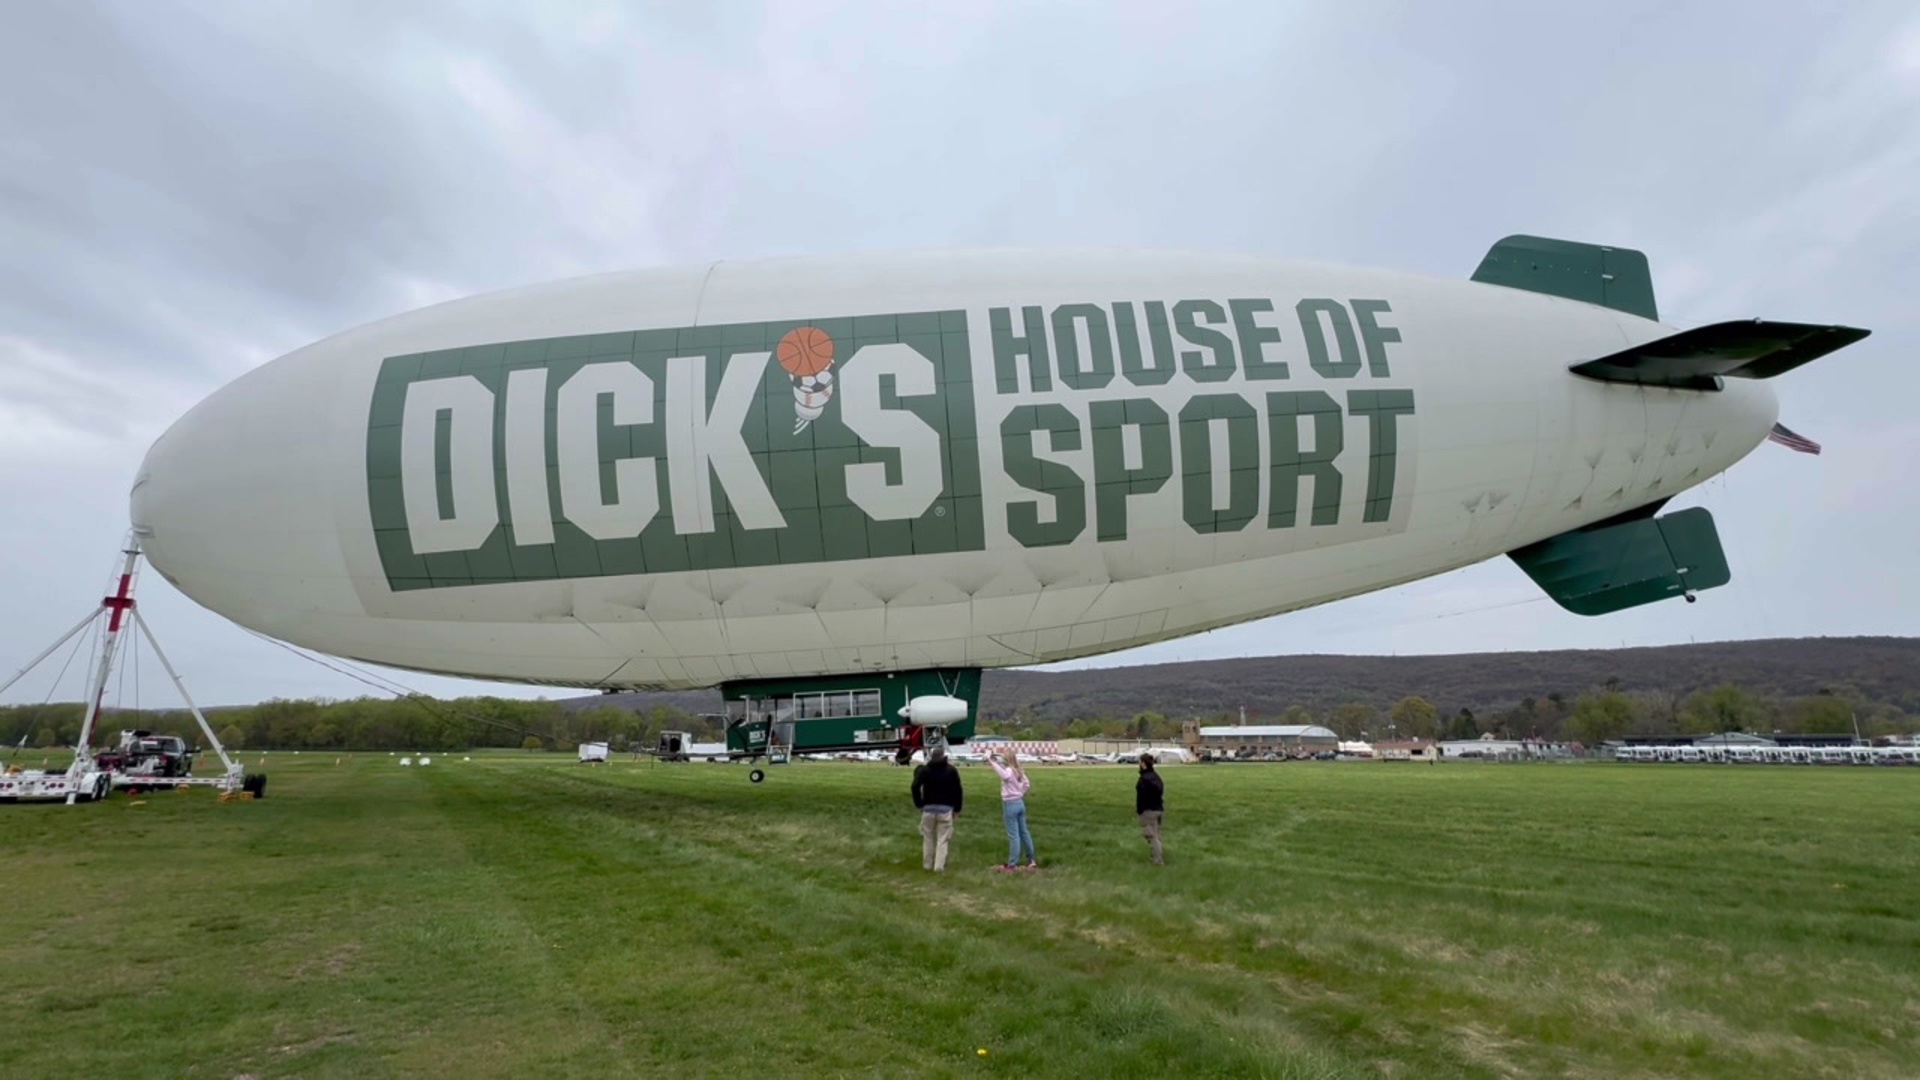 The dirigible docked in Luzerne County over the weekend after flying over the valley on Friday.